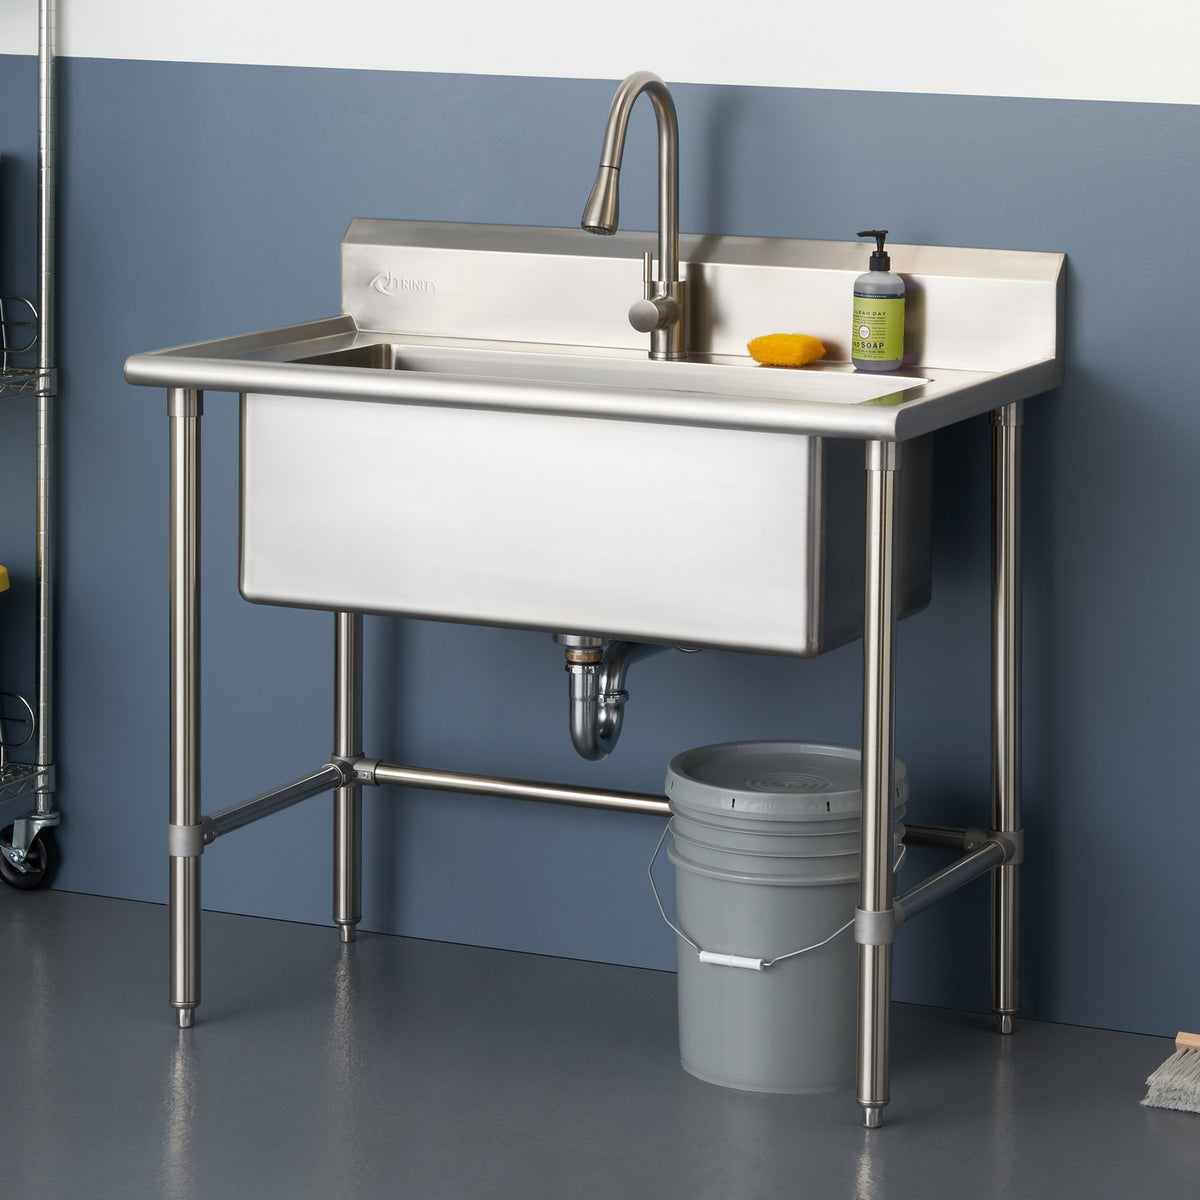 32" X 16" Stainless Steel Utility Sink with Pull-Out Faucet